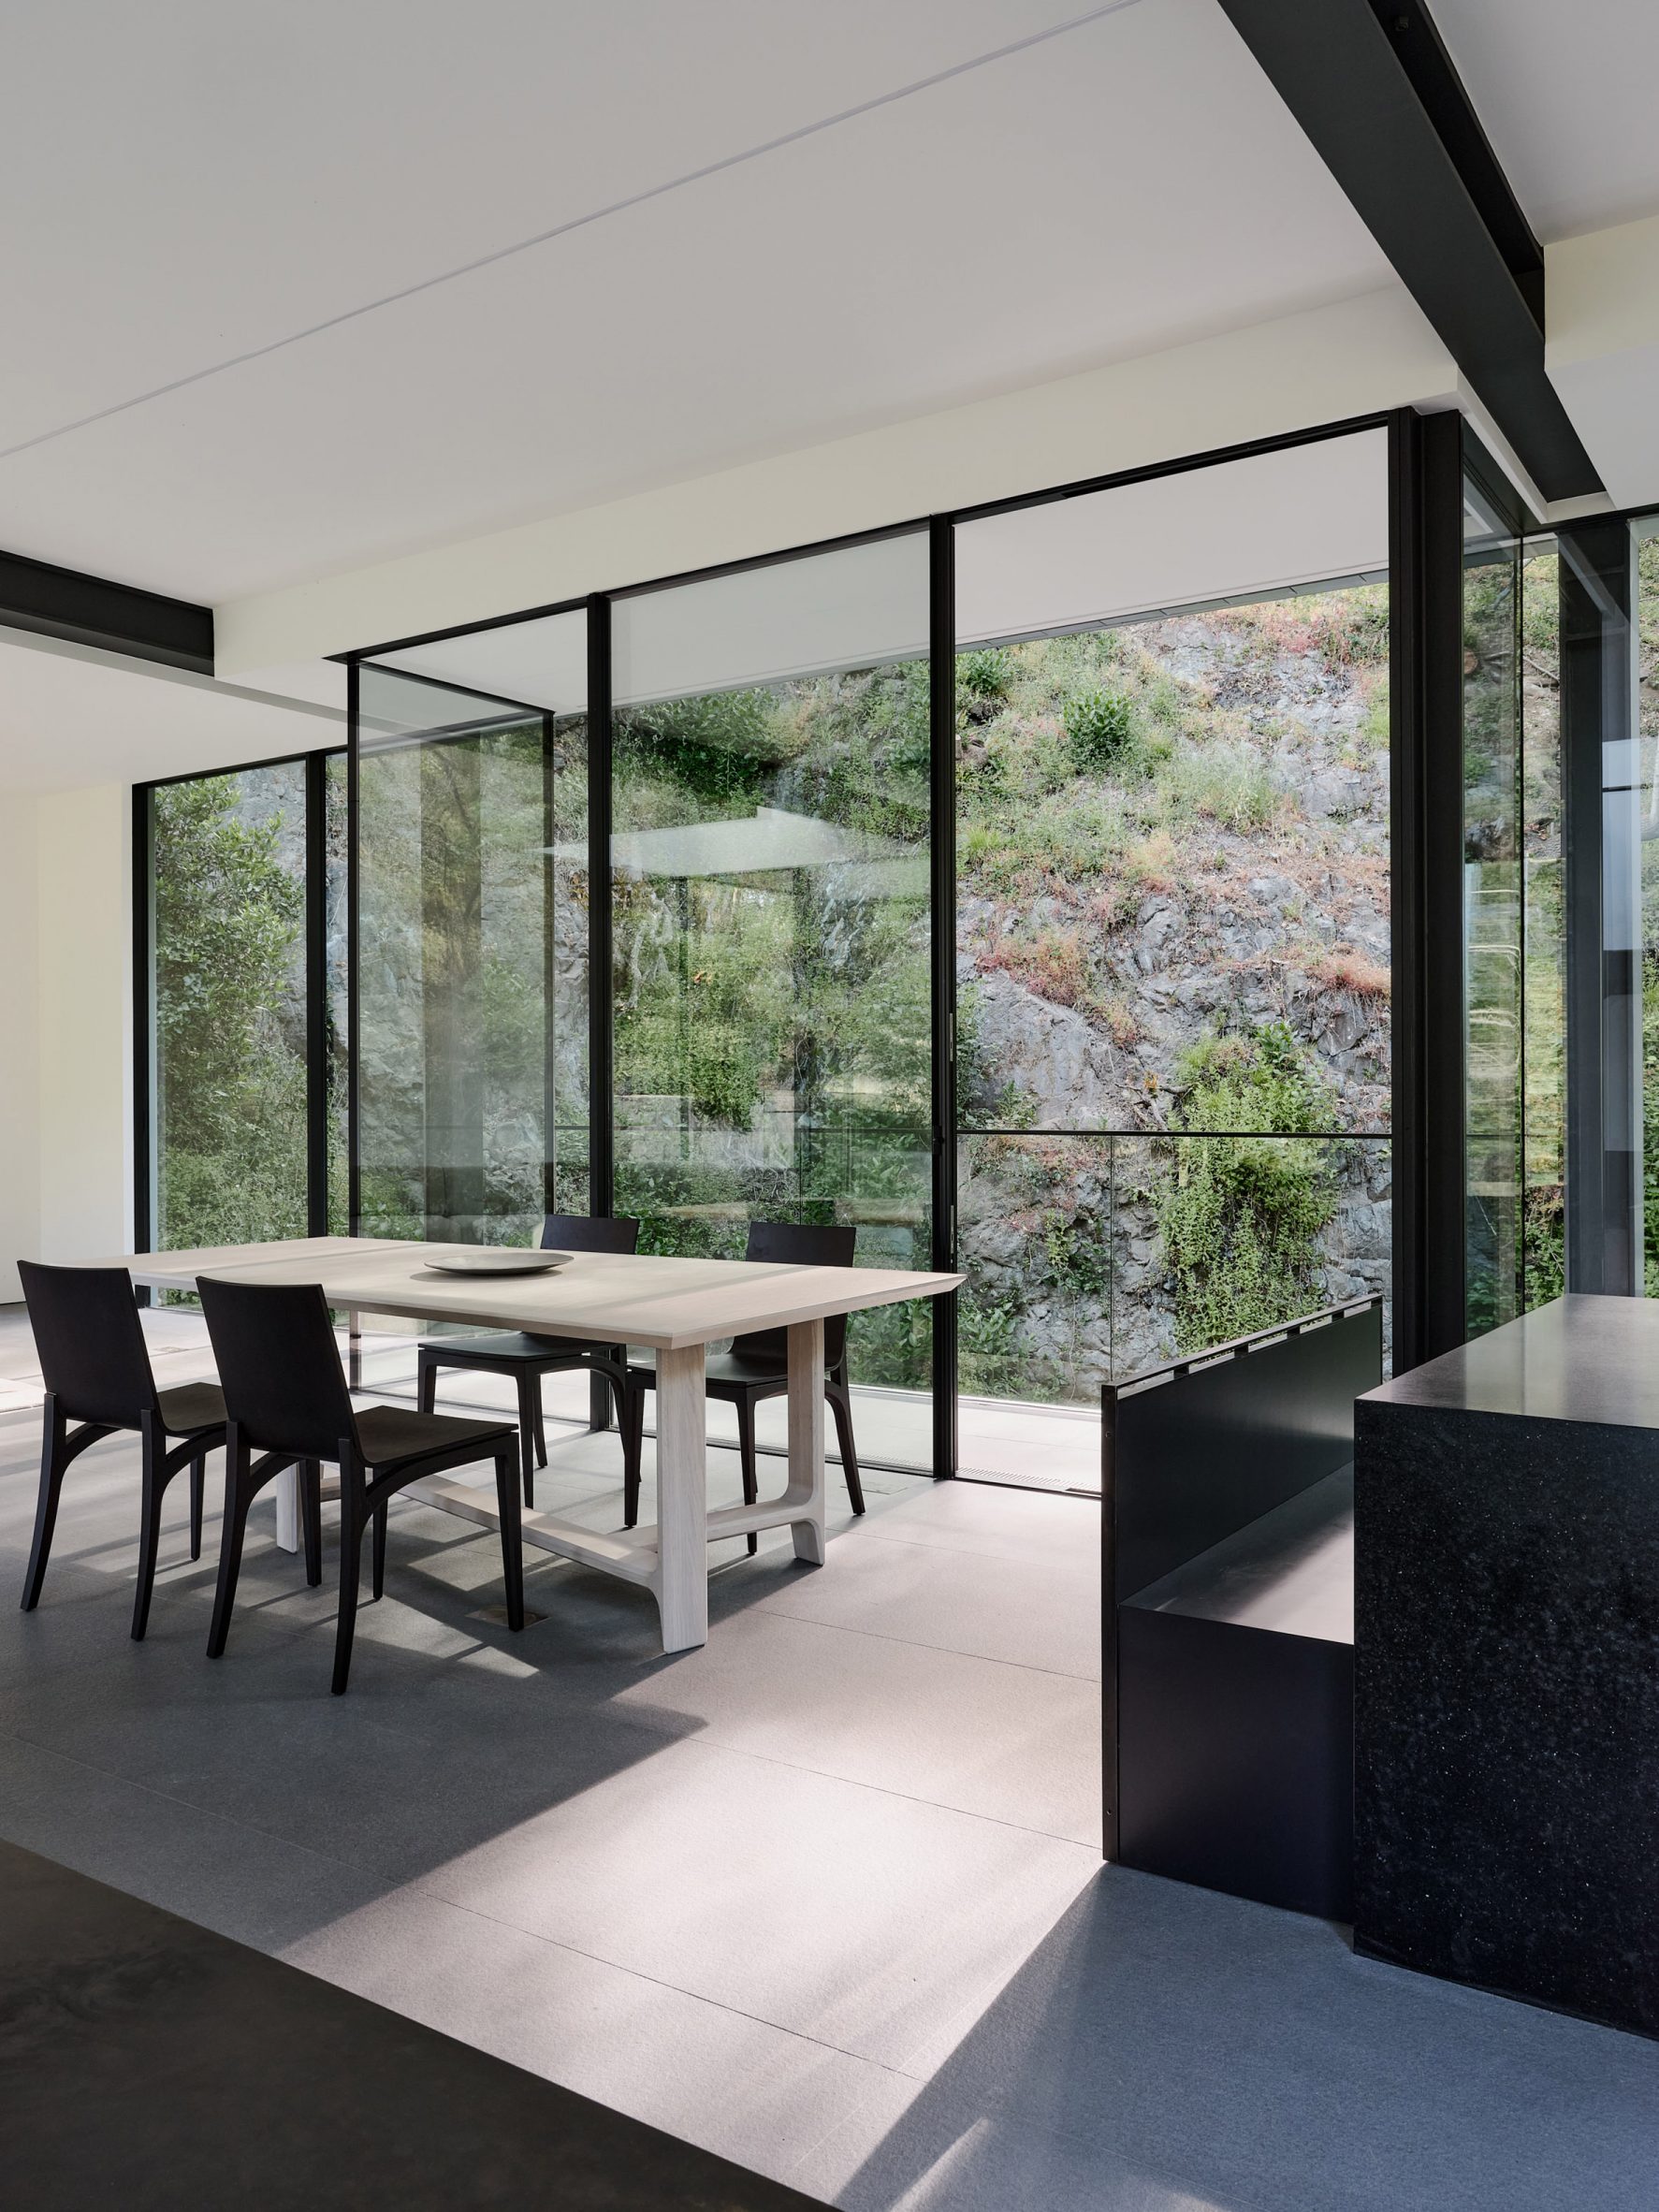 Kitchen with floor-to-ceiling glass windows with views of side of hill